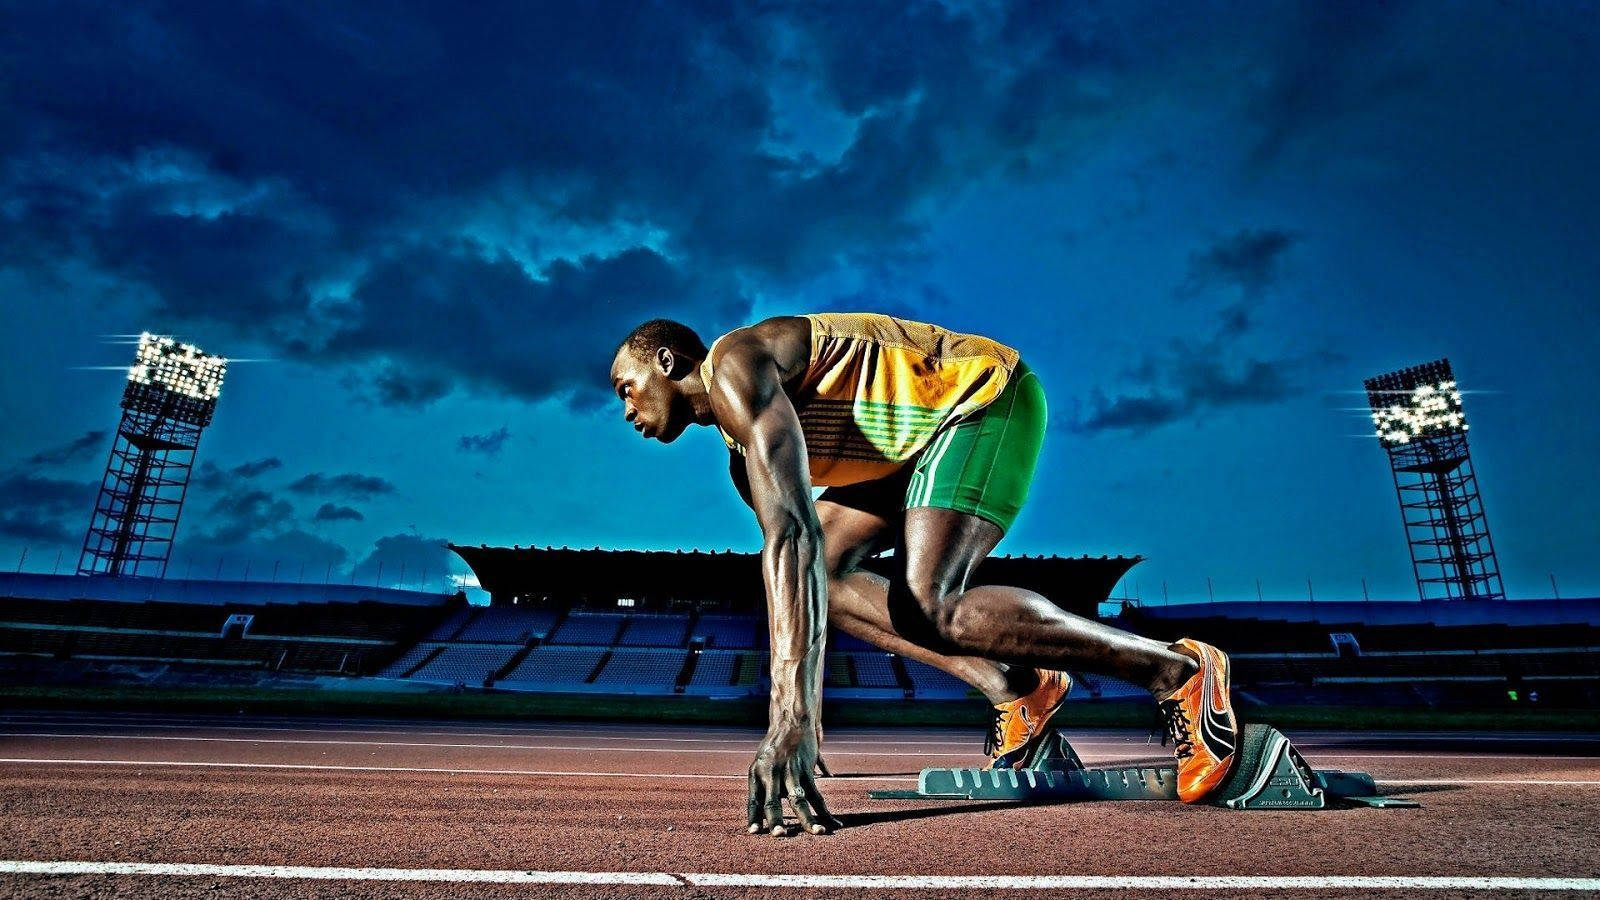 Track And Field Sports Desktop Background